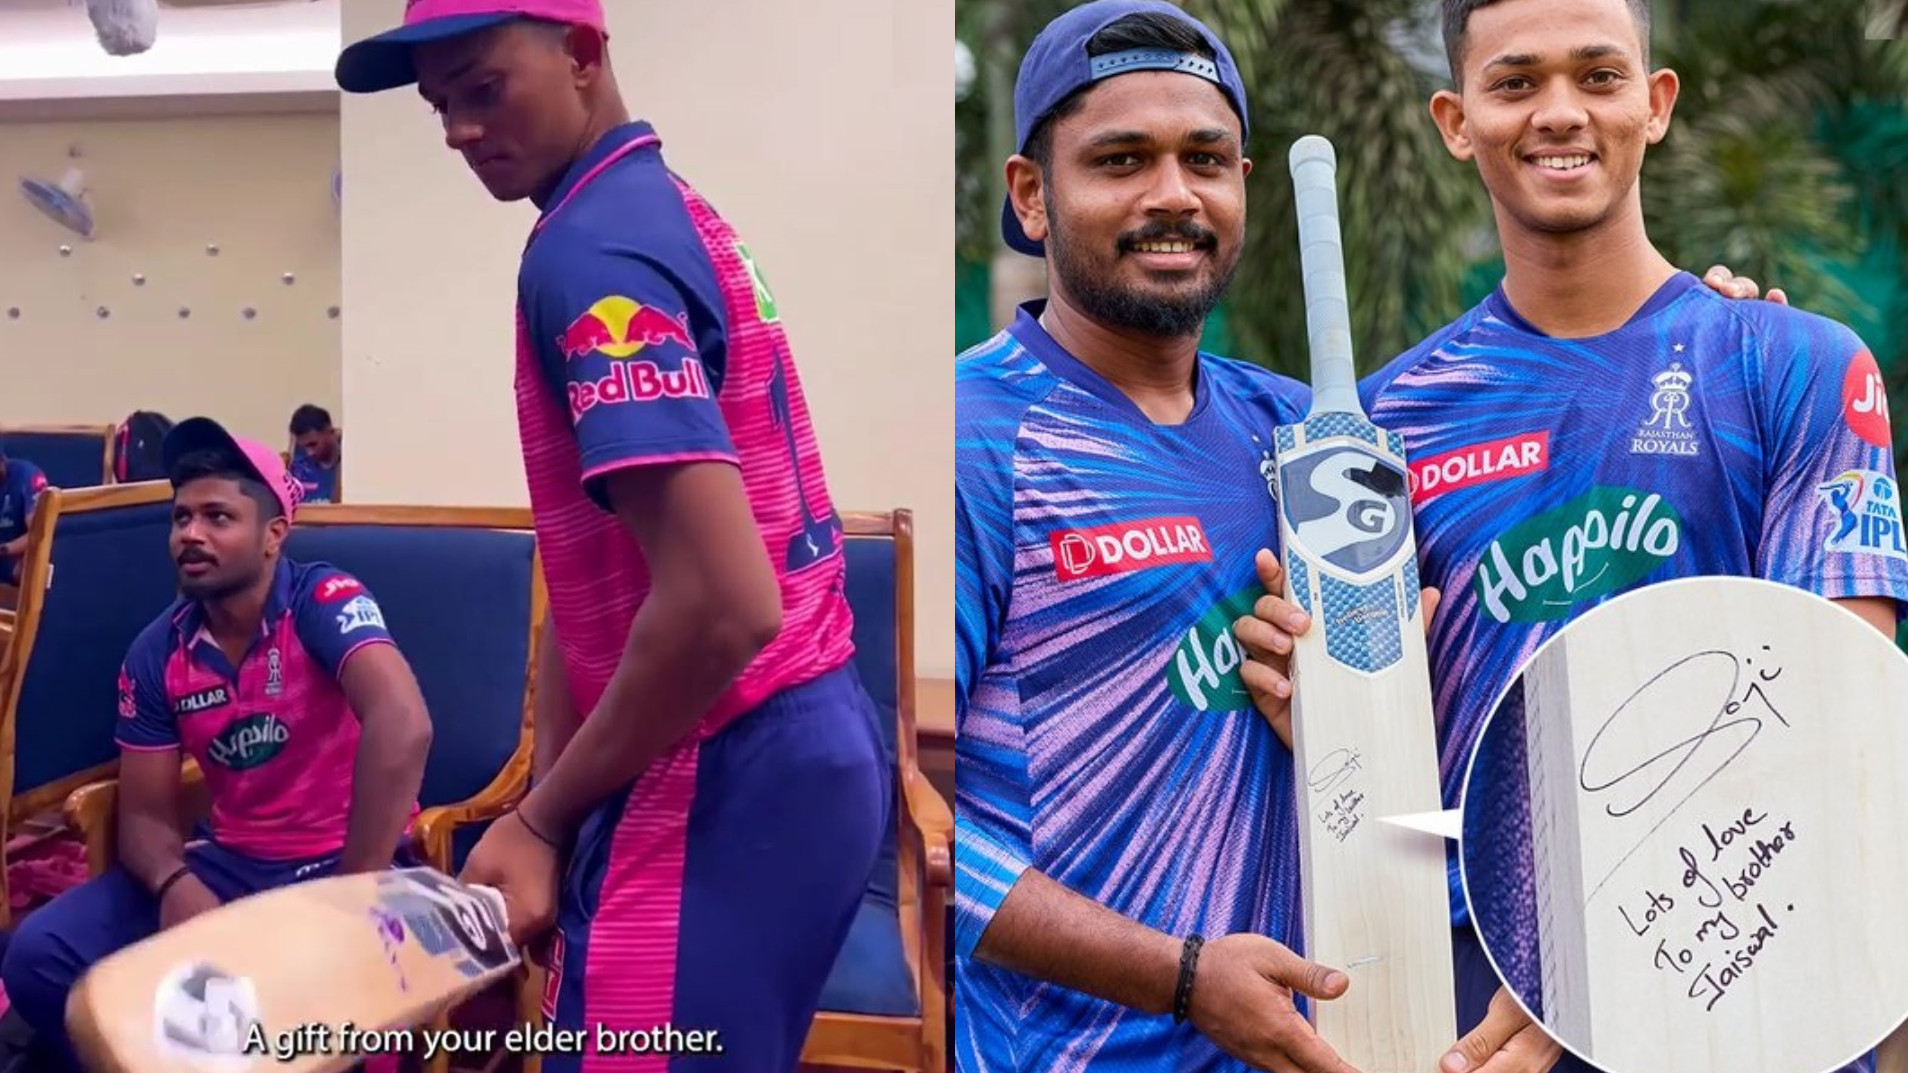 IPL 2022: WATCH- “To my brother”- Sanju Samson gifts Yashasvi Jaiswal a new bat as promised during a chat